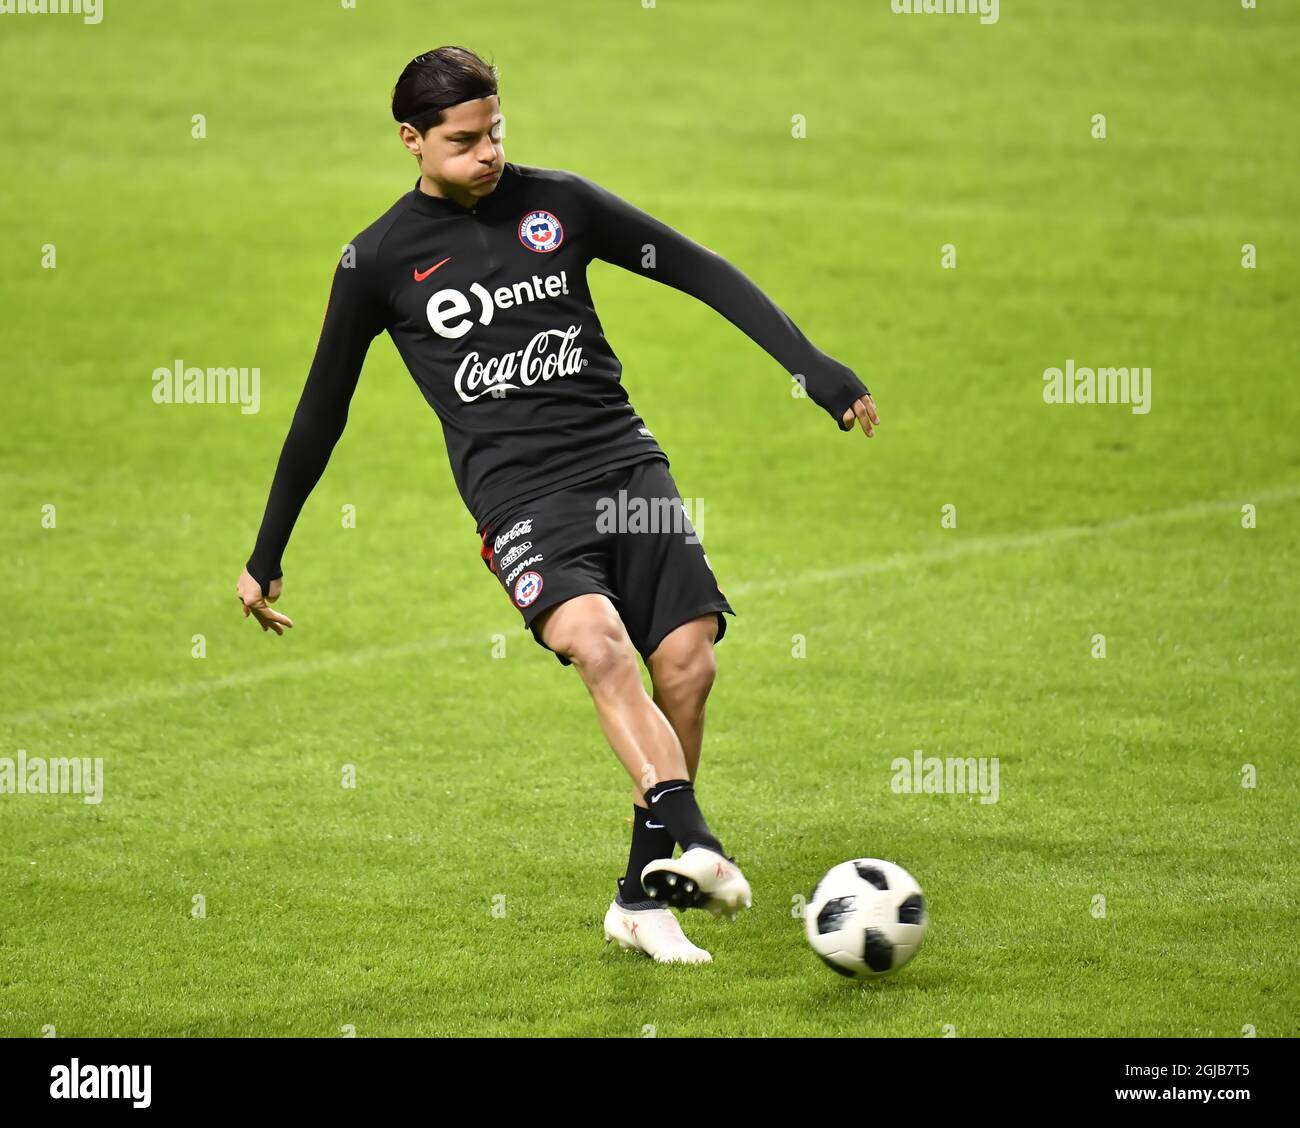 Chile's national soccer team player Miiko Albornoz in action during a training session at Friends Arena in Stockholm, Sweden, on March 23, 2018. Chile will meet Sweden for a friendly game tomorrow, March 24. Photo: Jonas Ekstromer / TT / code 10030  Stock Photo